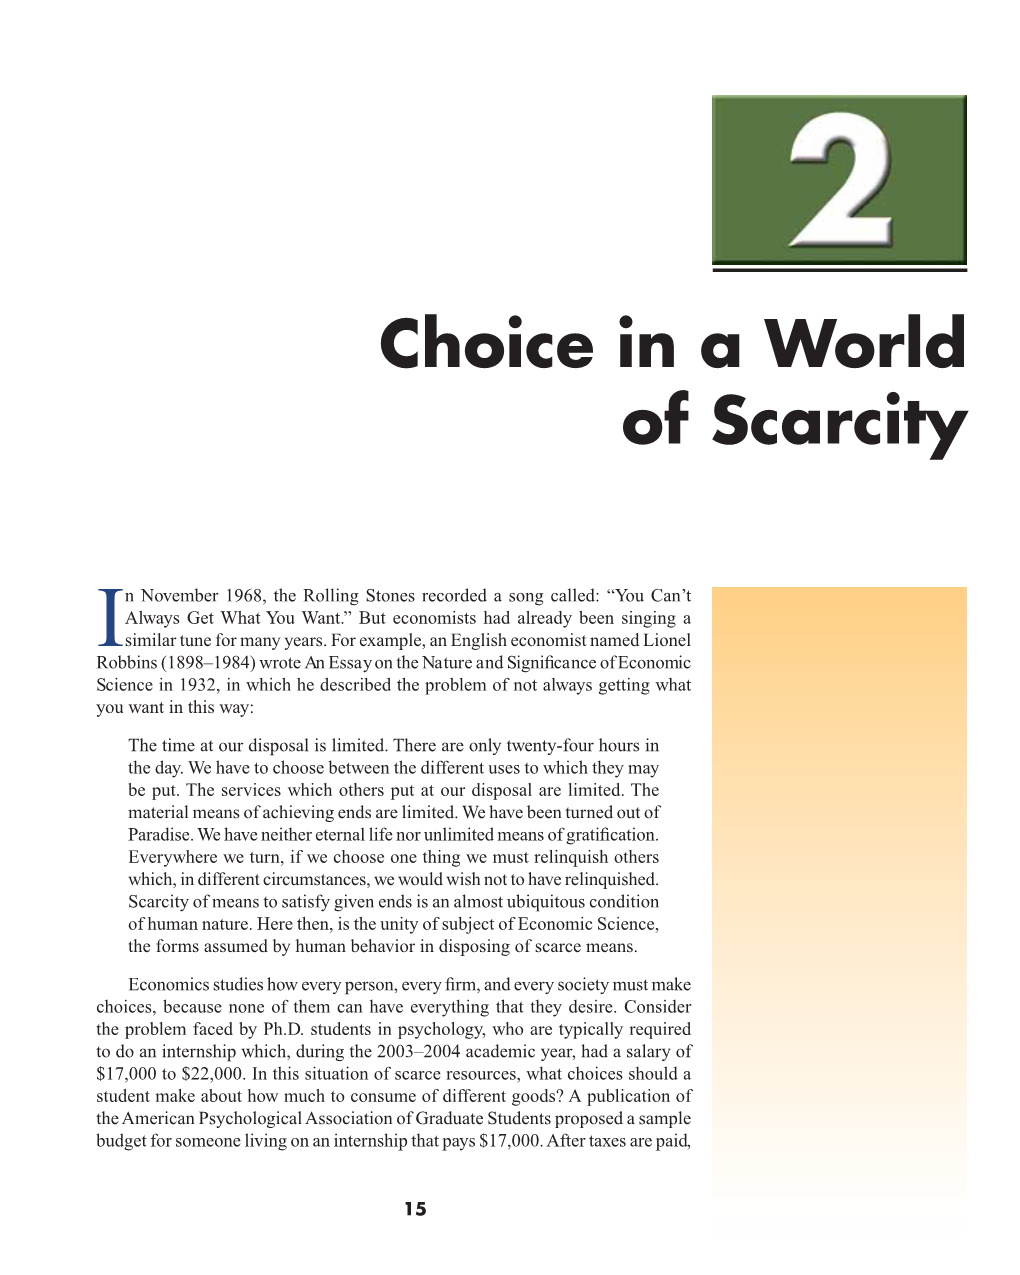 Choice in a World of Scarcity